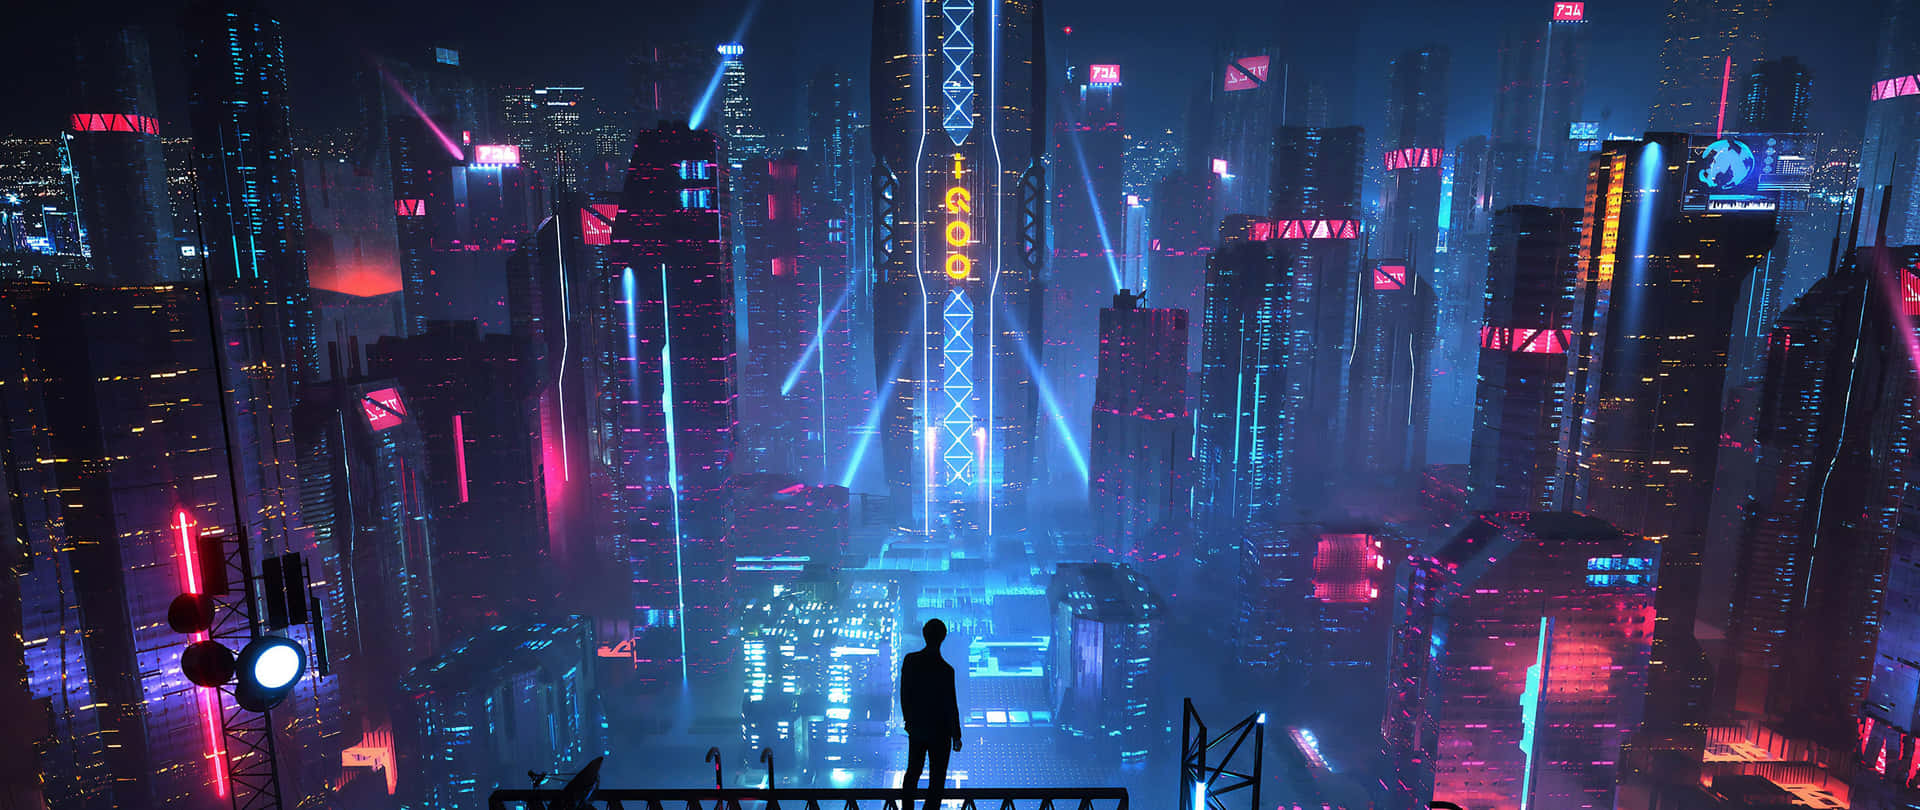 A Man Standing On A Ledge In A Futuristic City